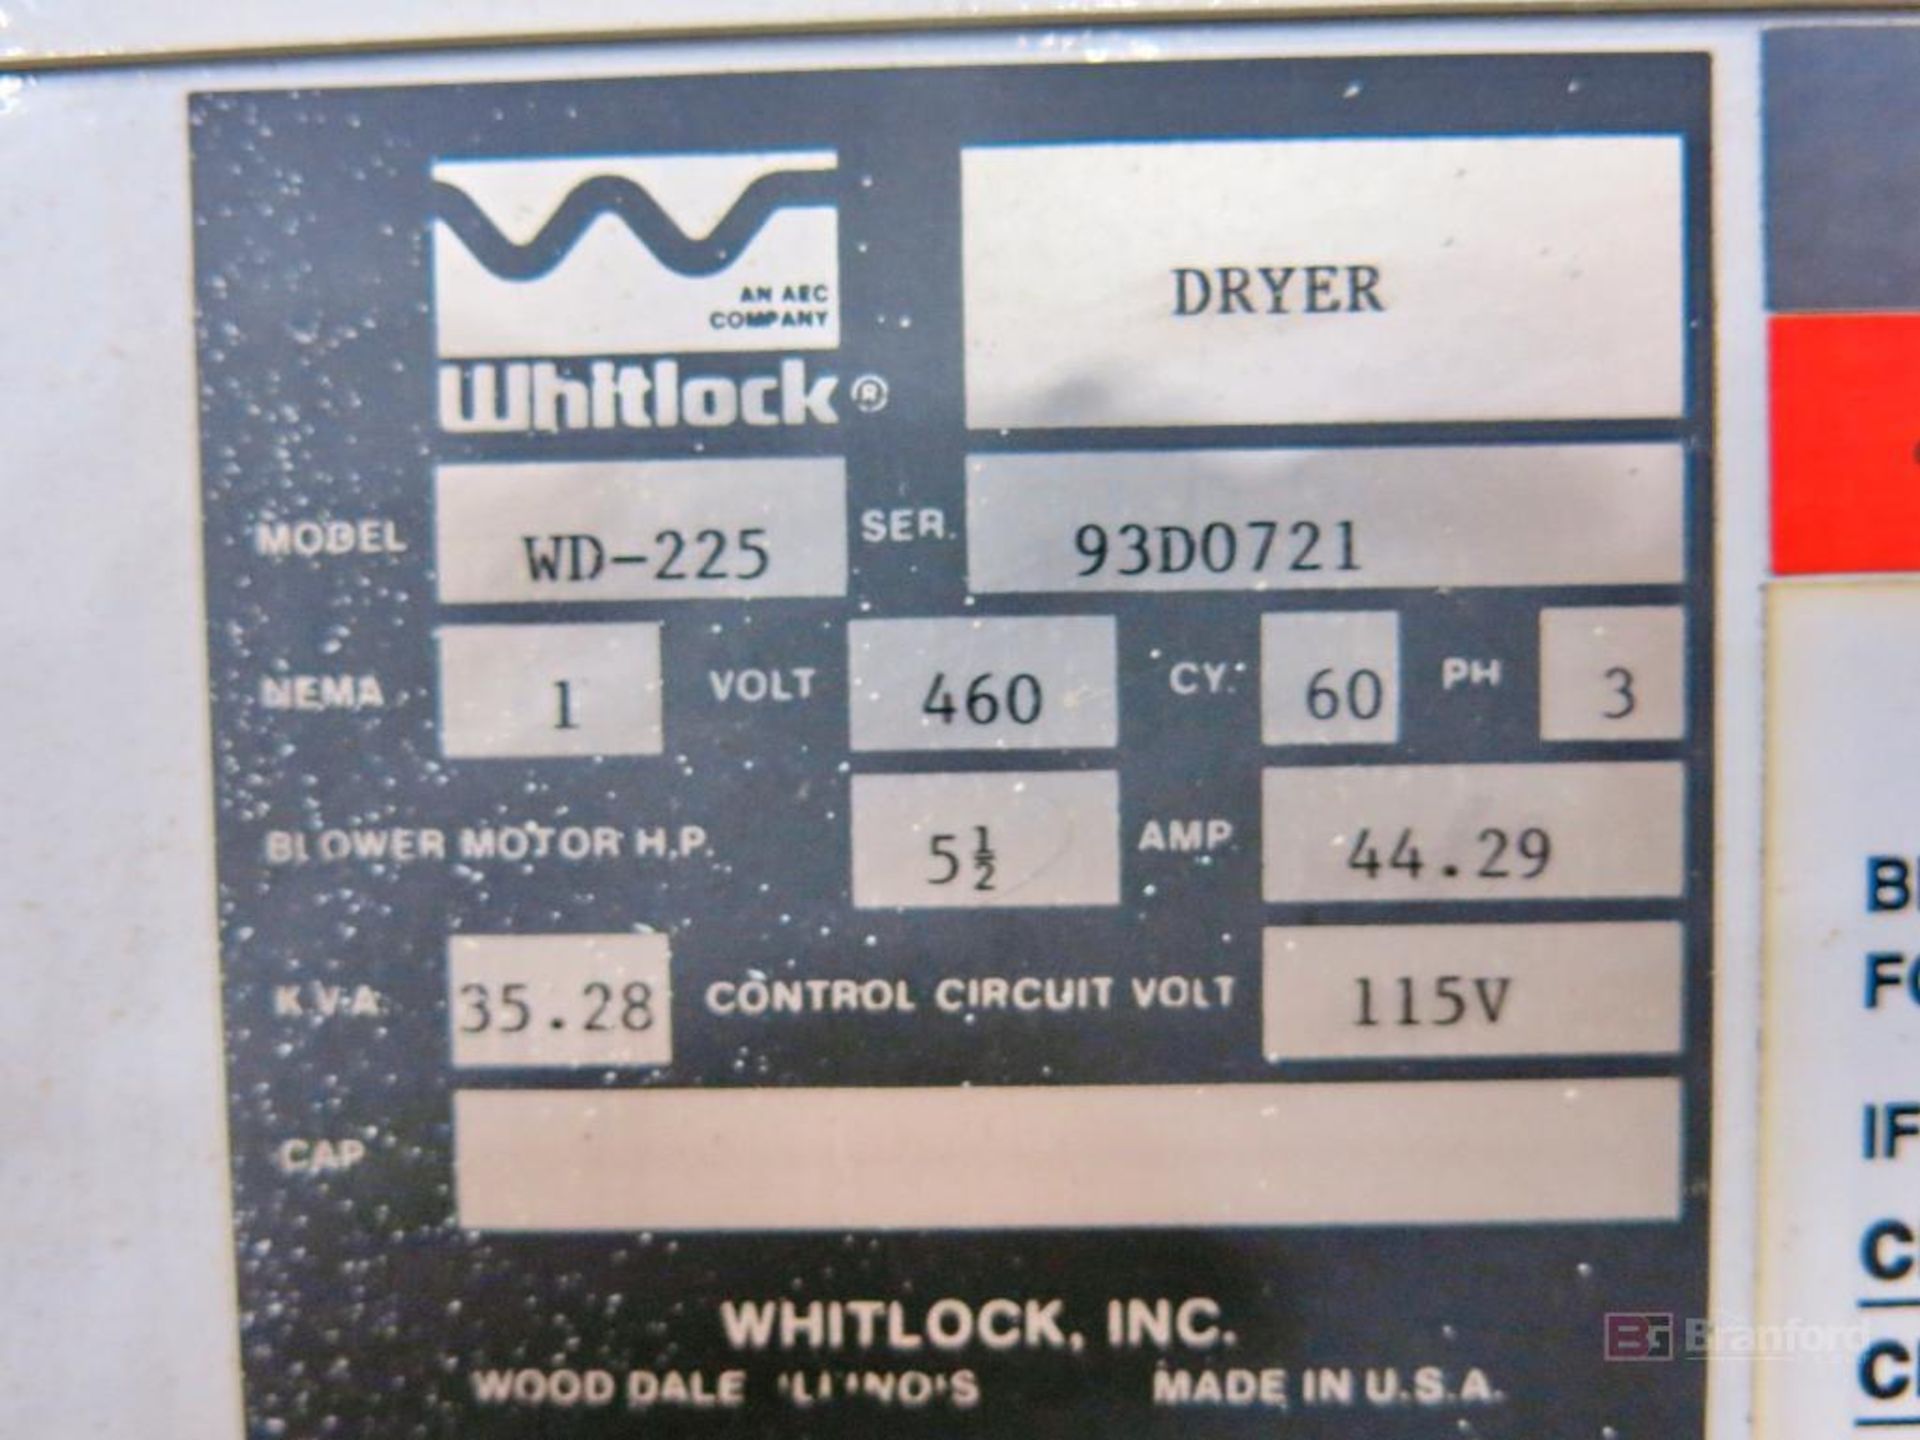 AEC Whitlock Model WD-225 Resin Material Dryer - Image 4 of 4